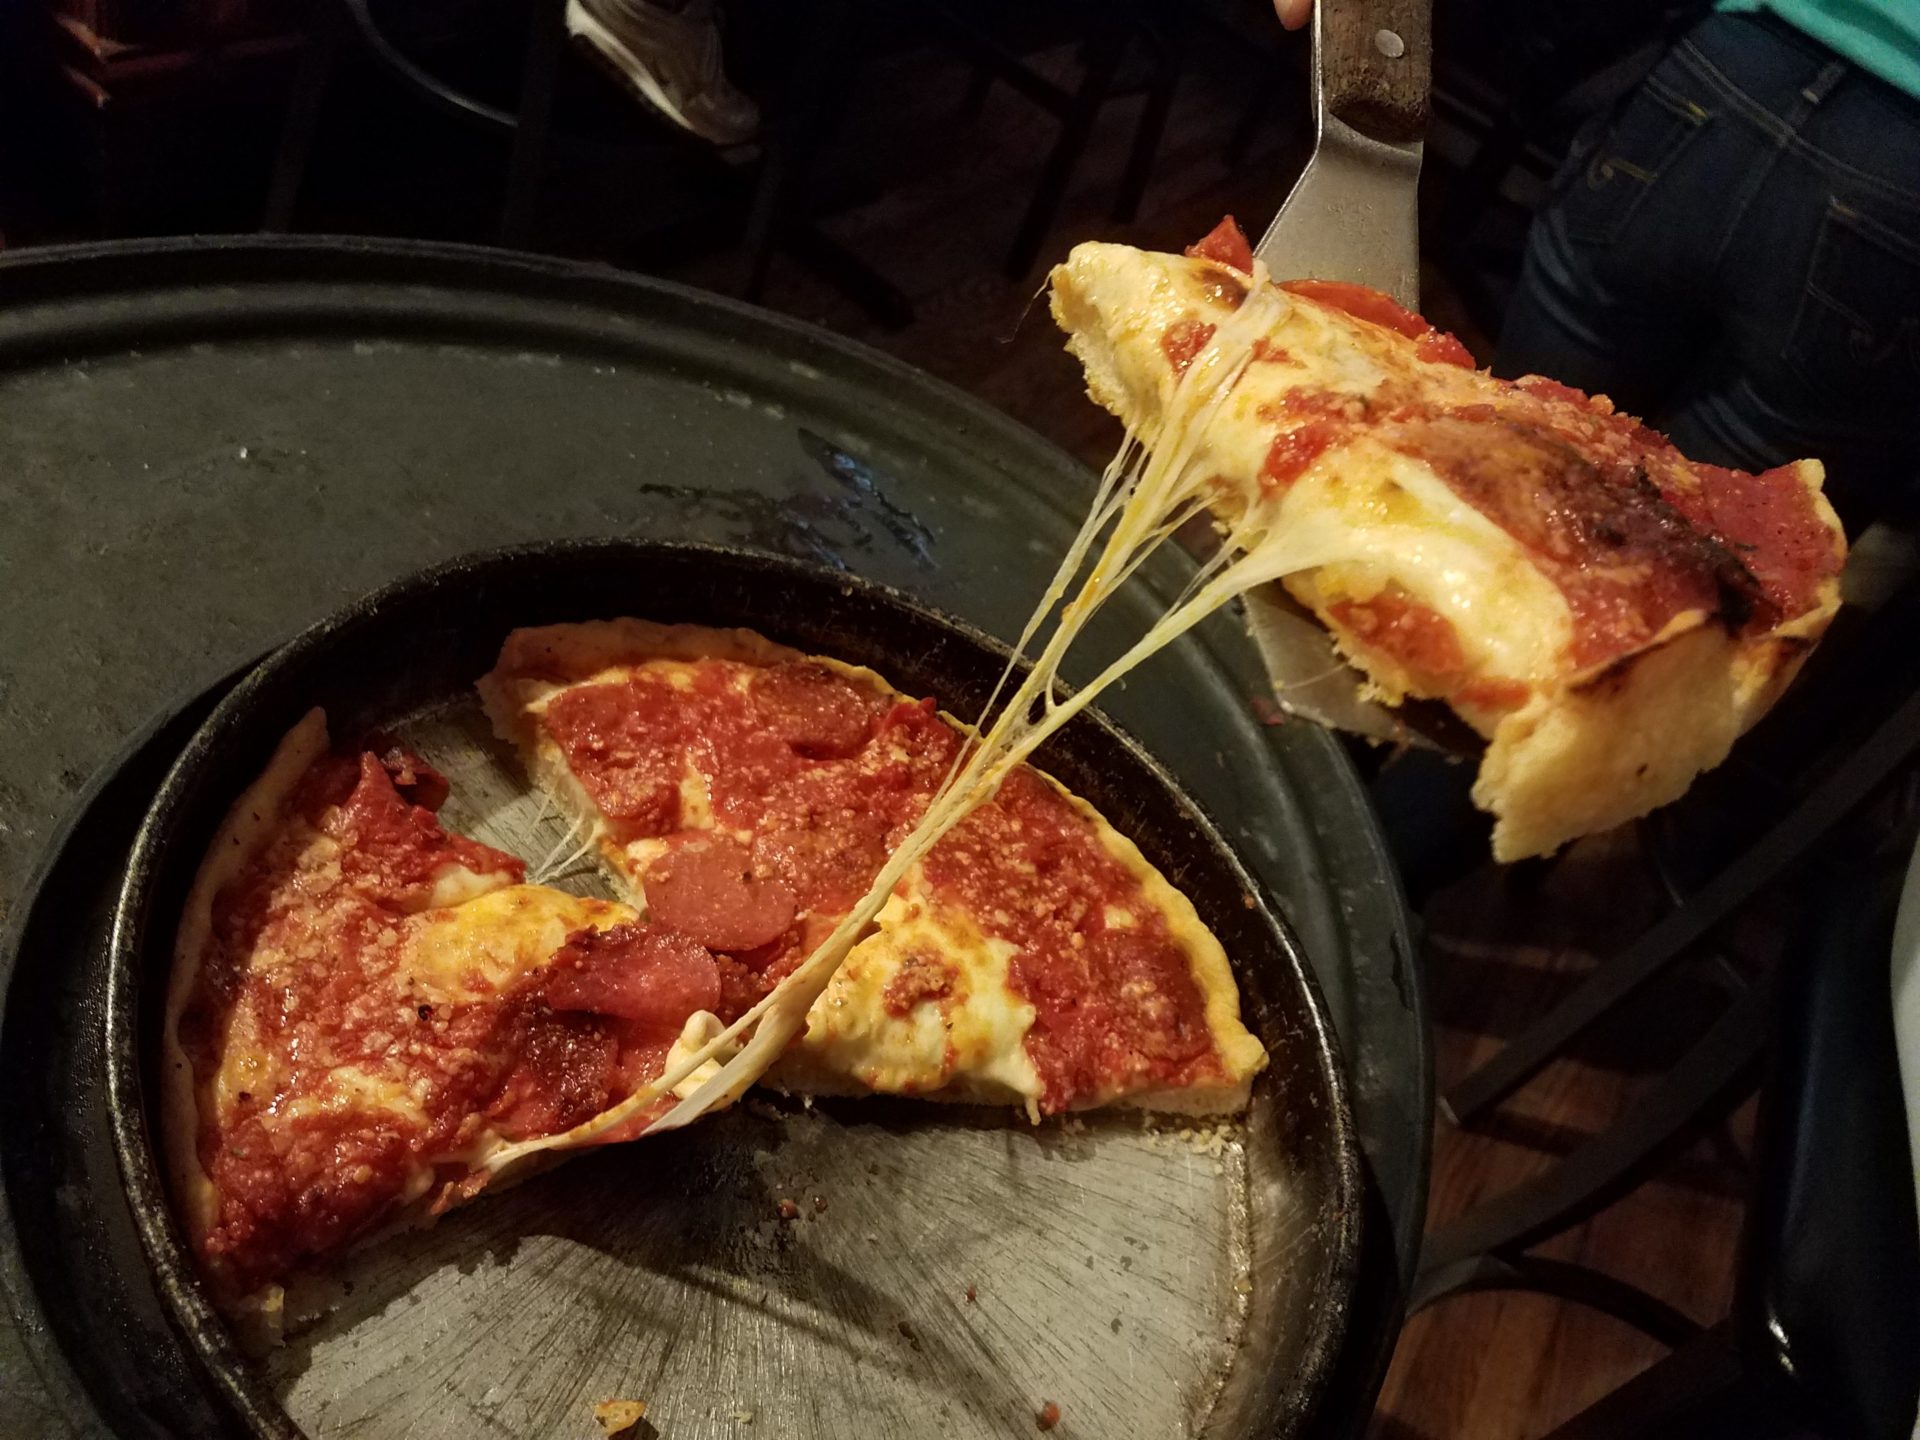 a pizza being cut in half